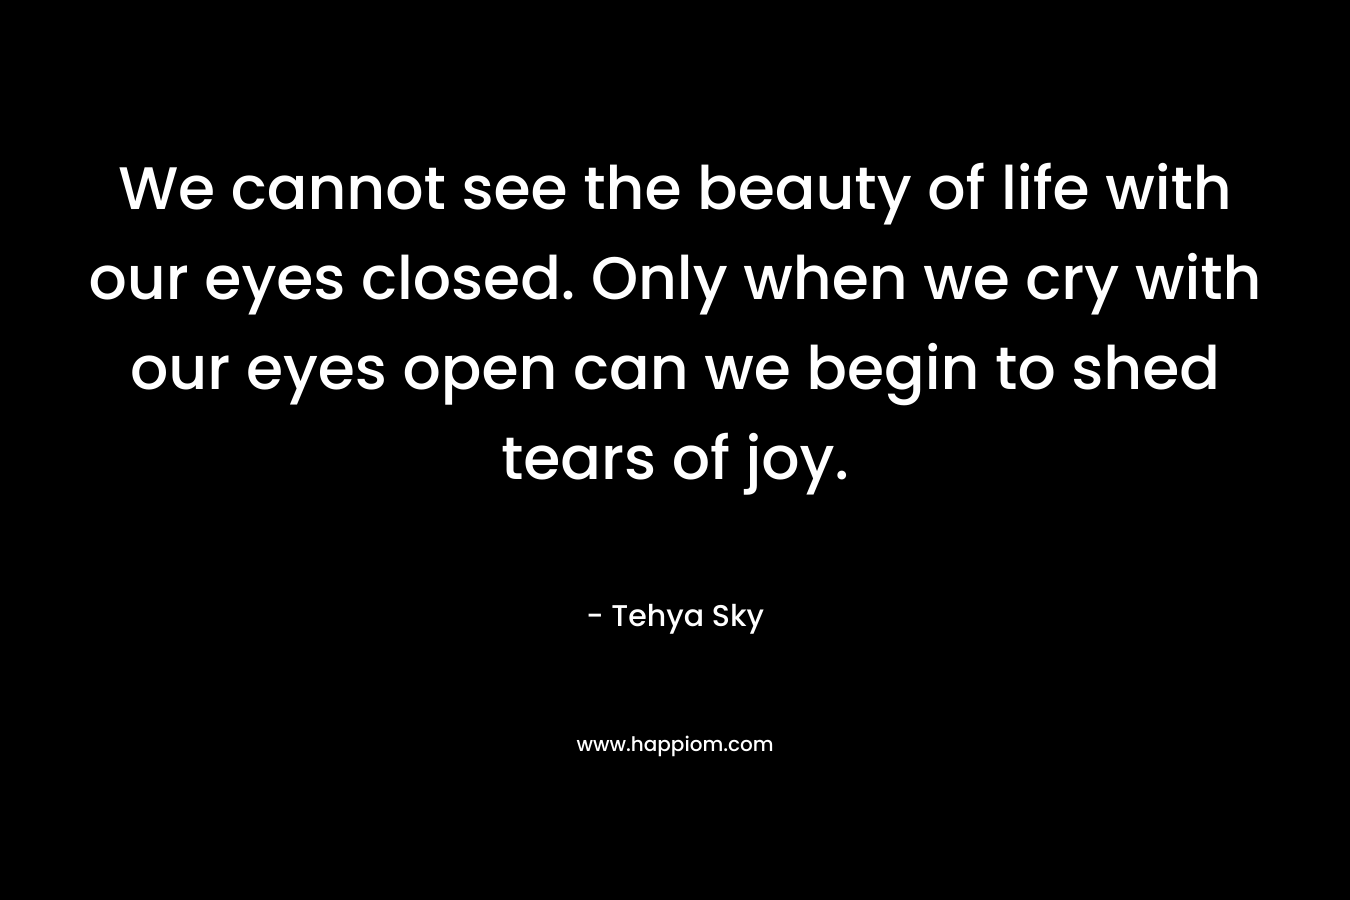 We cannot see the beauty of life with our eyes closed. Only when we cry with our eyes open can we begin to shed tears of joy.